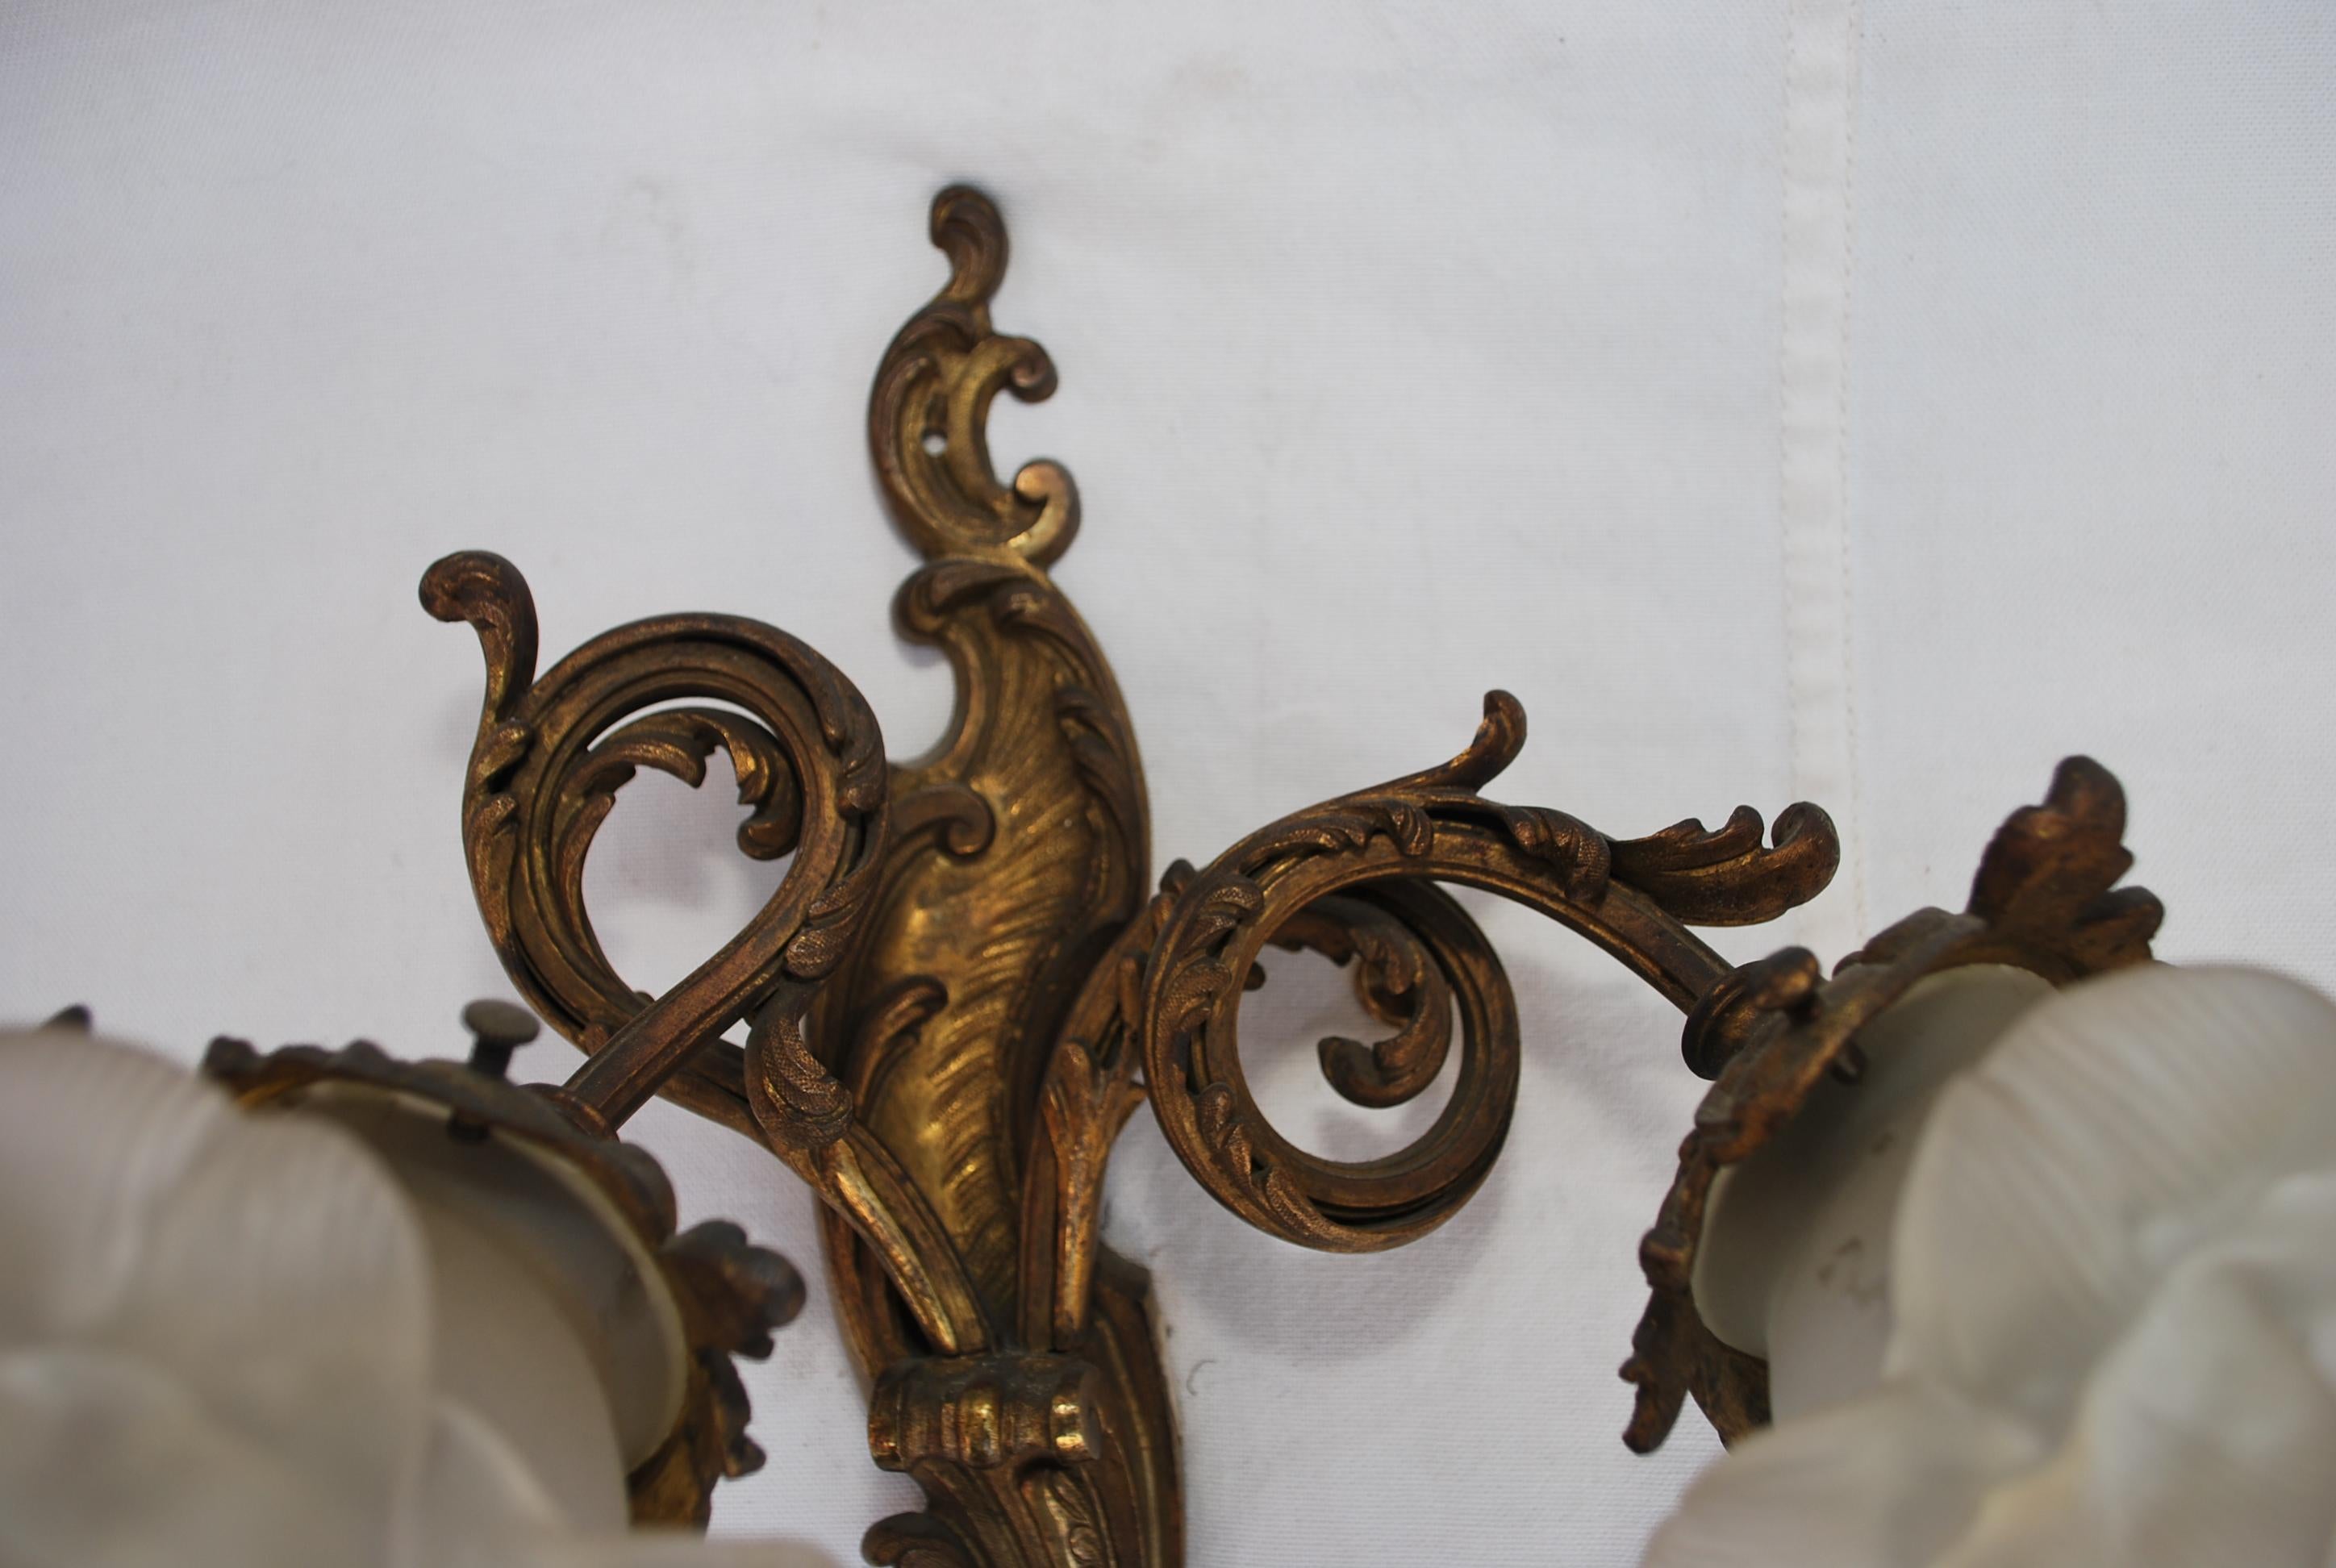 A beautiful pair of solid bronze sconces, the patina is so much nicer in person, I am sorry I realize way after taken the pictures, the glasses are dirty, they will be cleaned